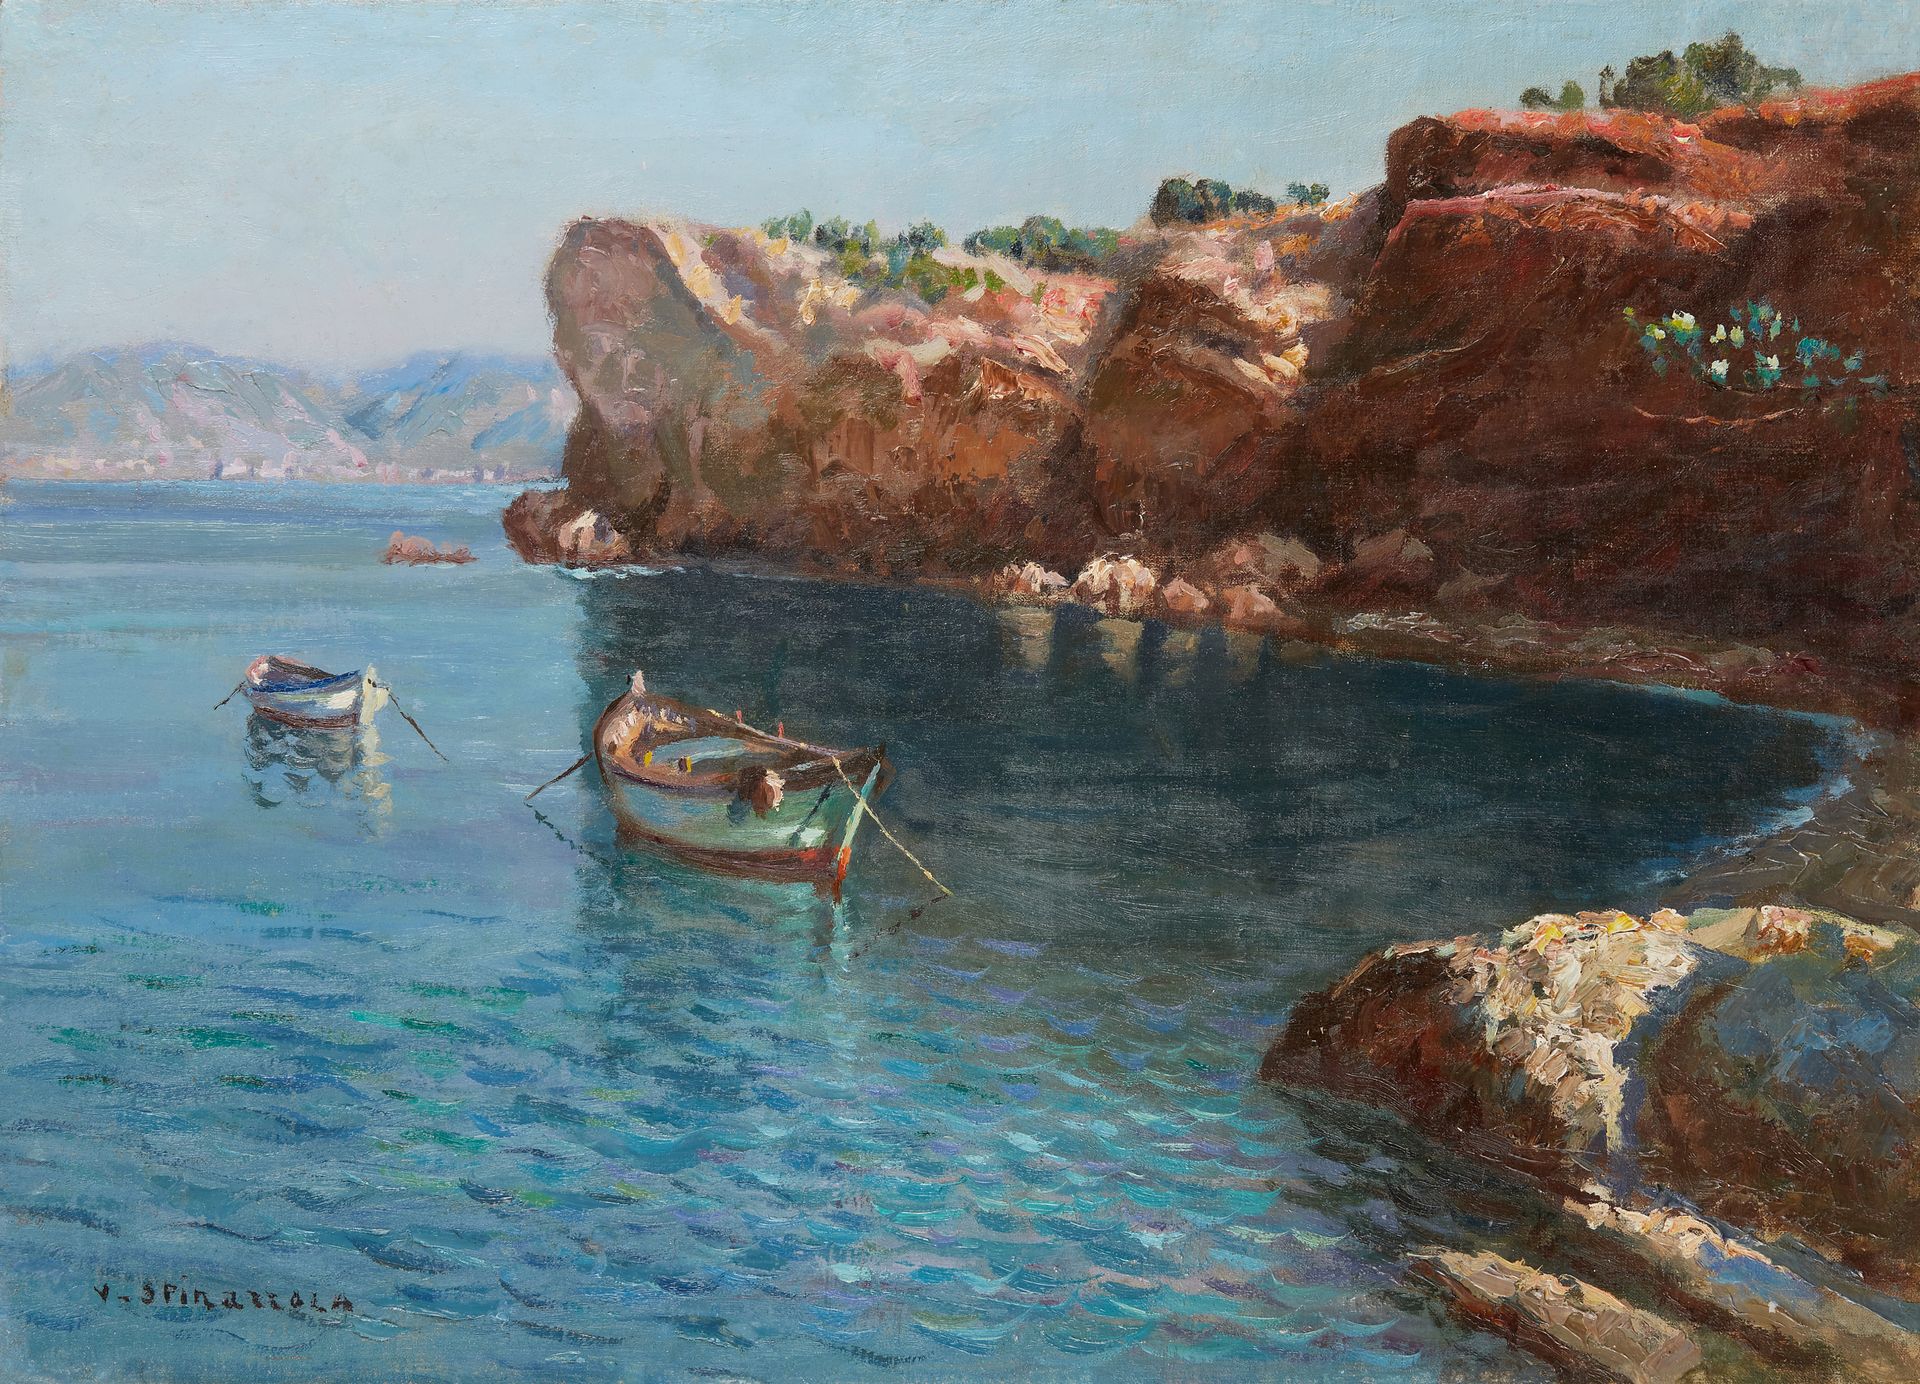 Null Vincent SPINAZZOLA


马赛的Calanque


布面油画，左下角有签名


42 x 51 厘米


修缮